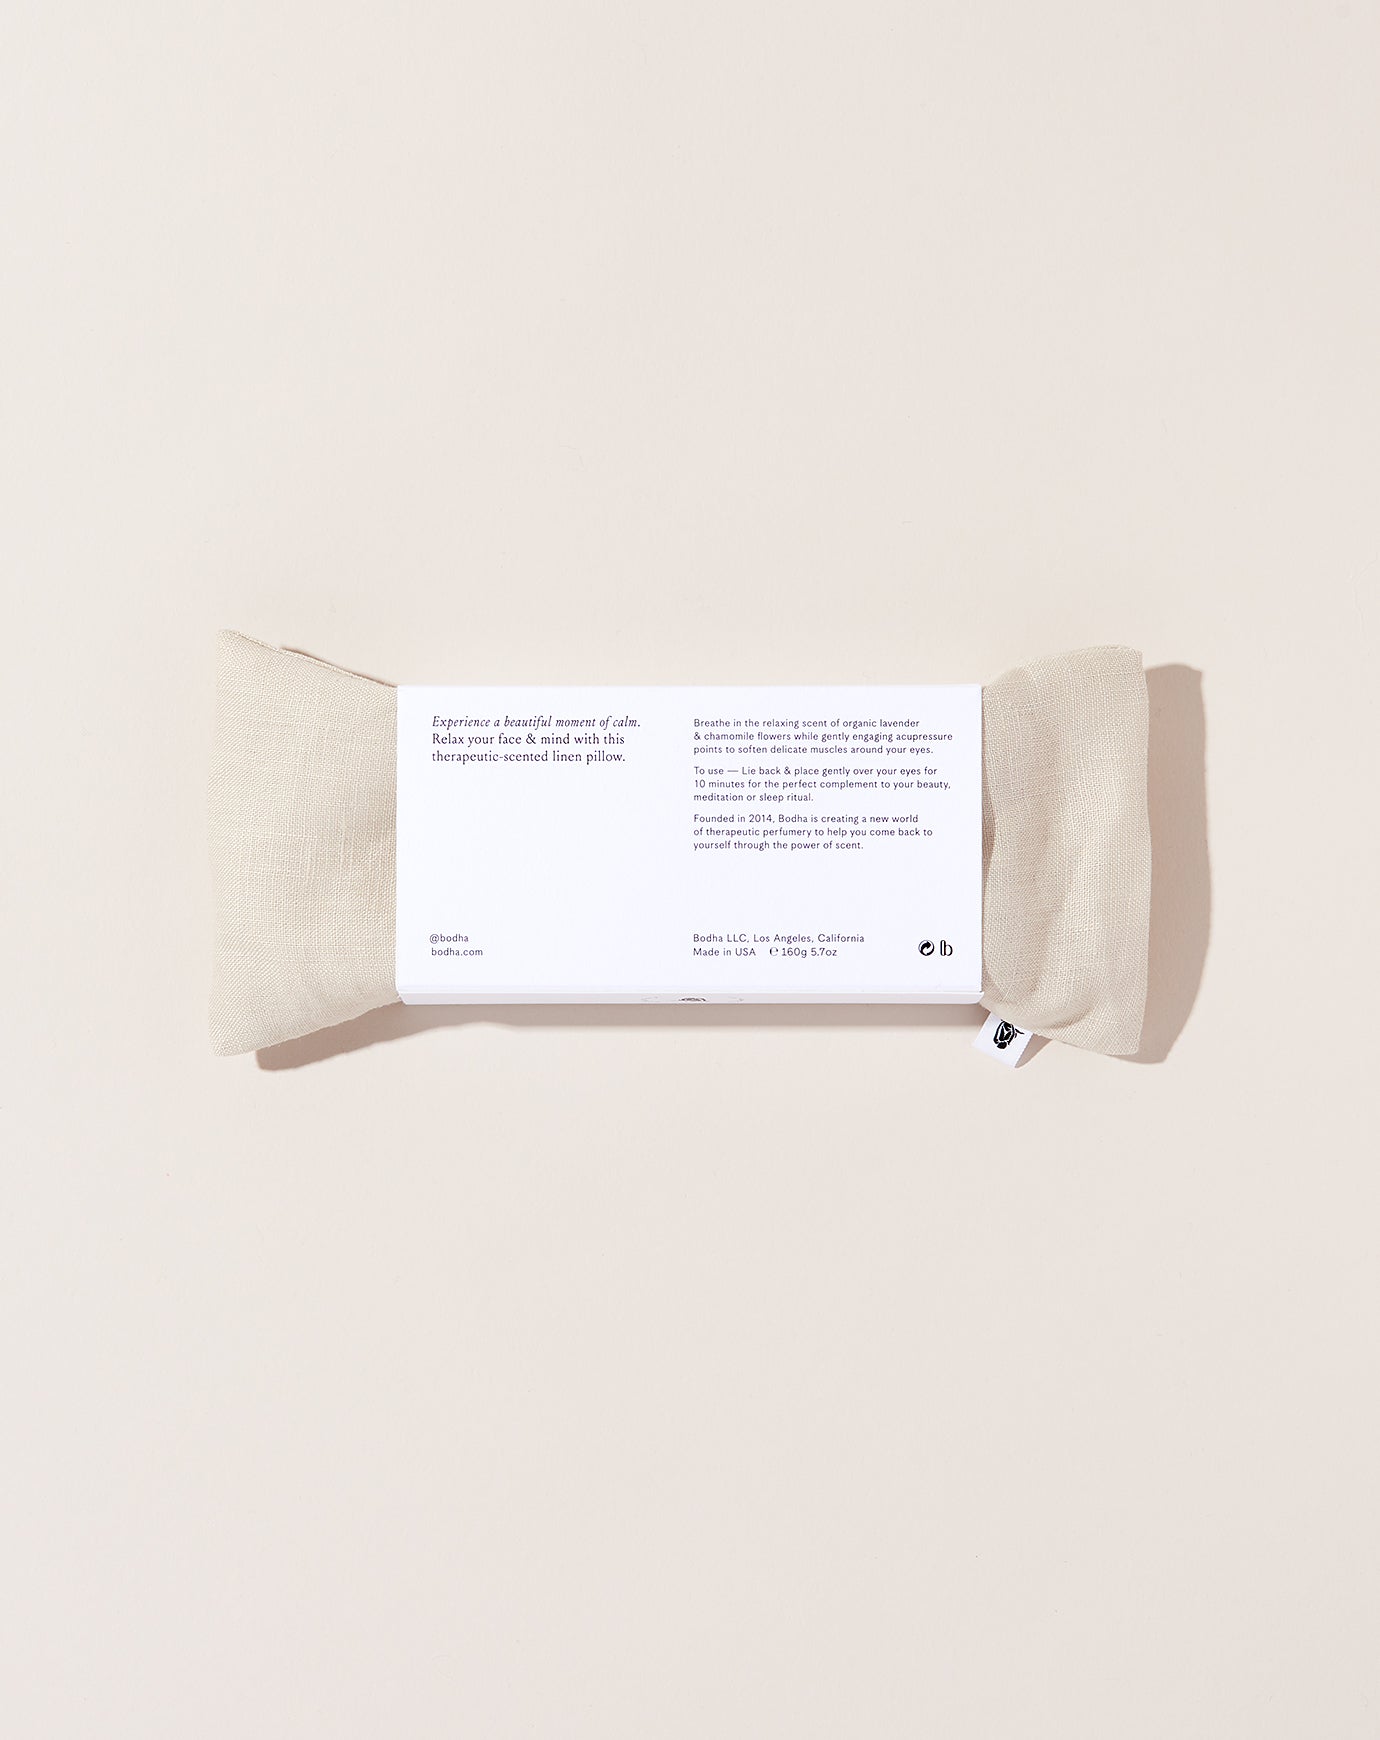 Linen Aromatherapy Eye Pillow in Natural